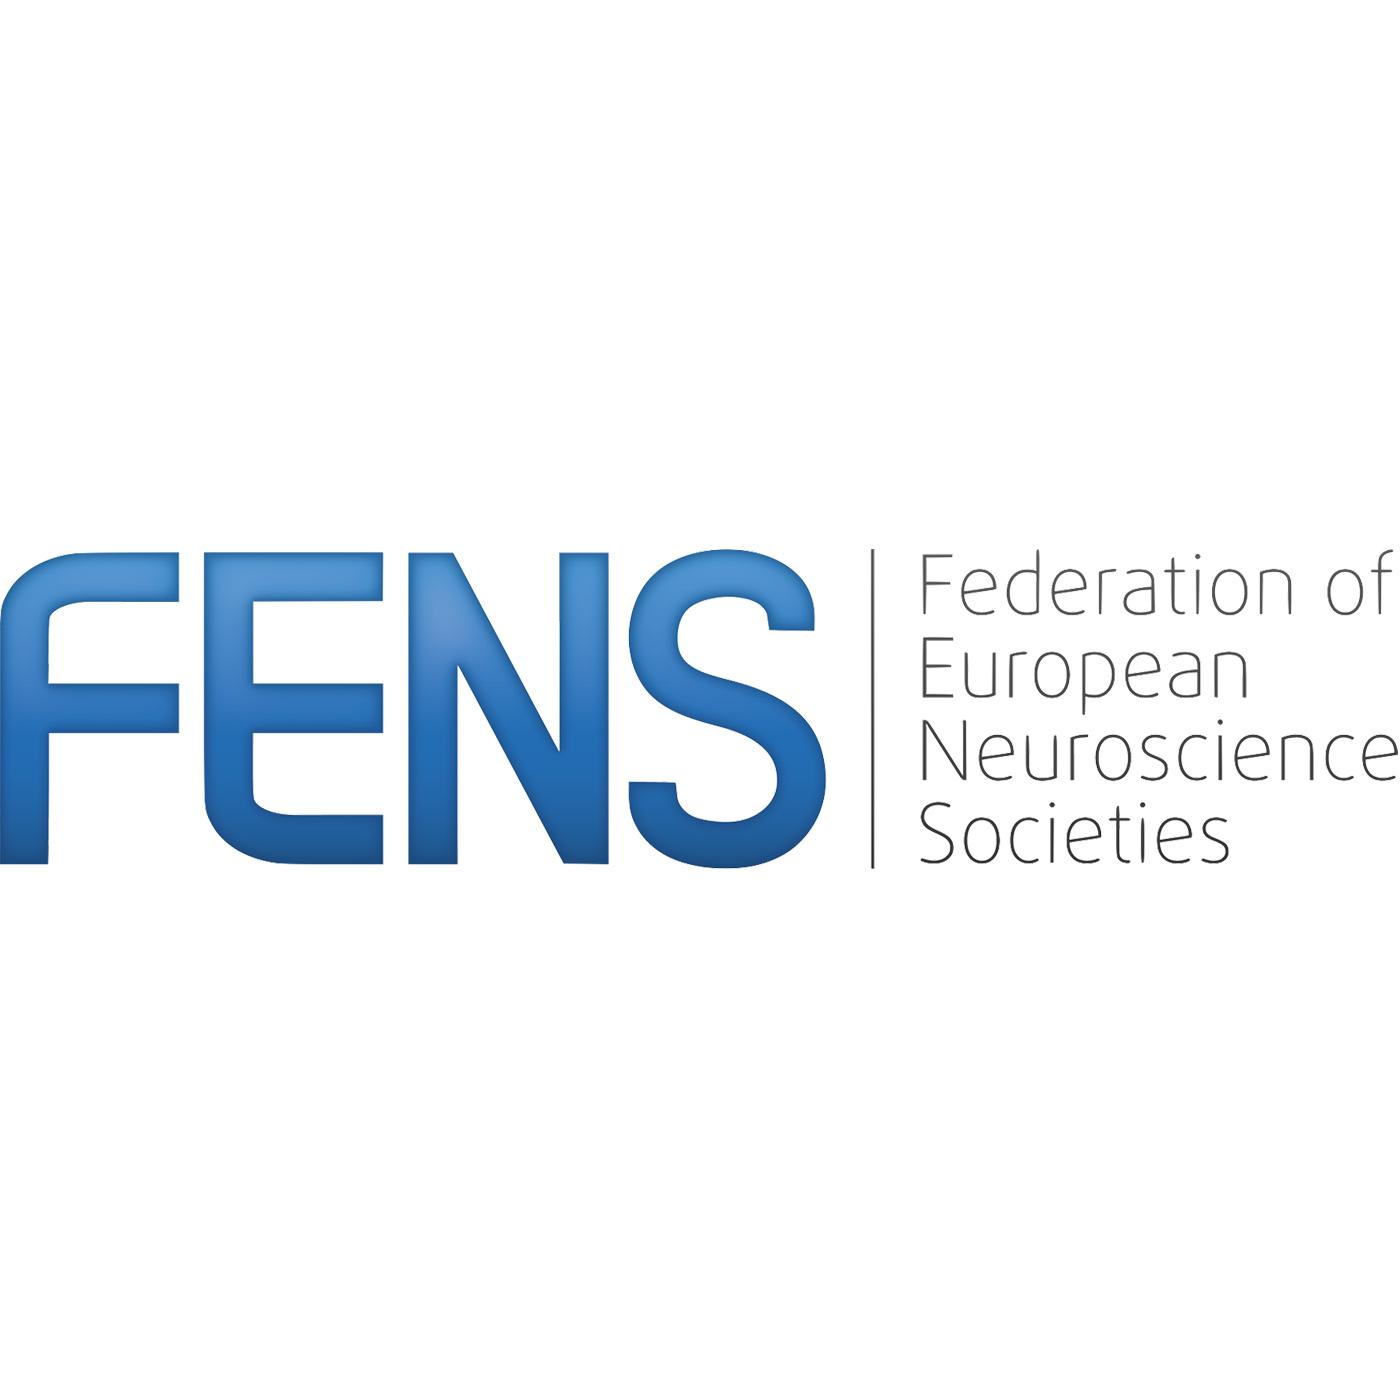 Record triple distinctions for Unit members at FENS Forum 2016